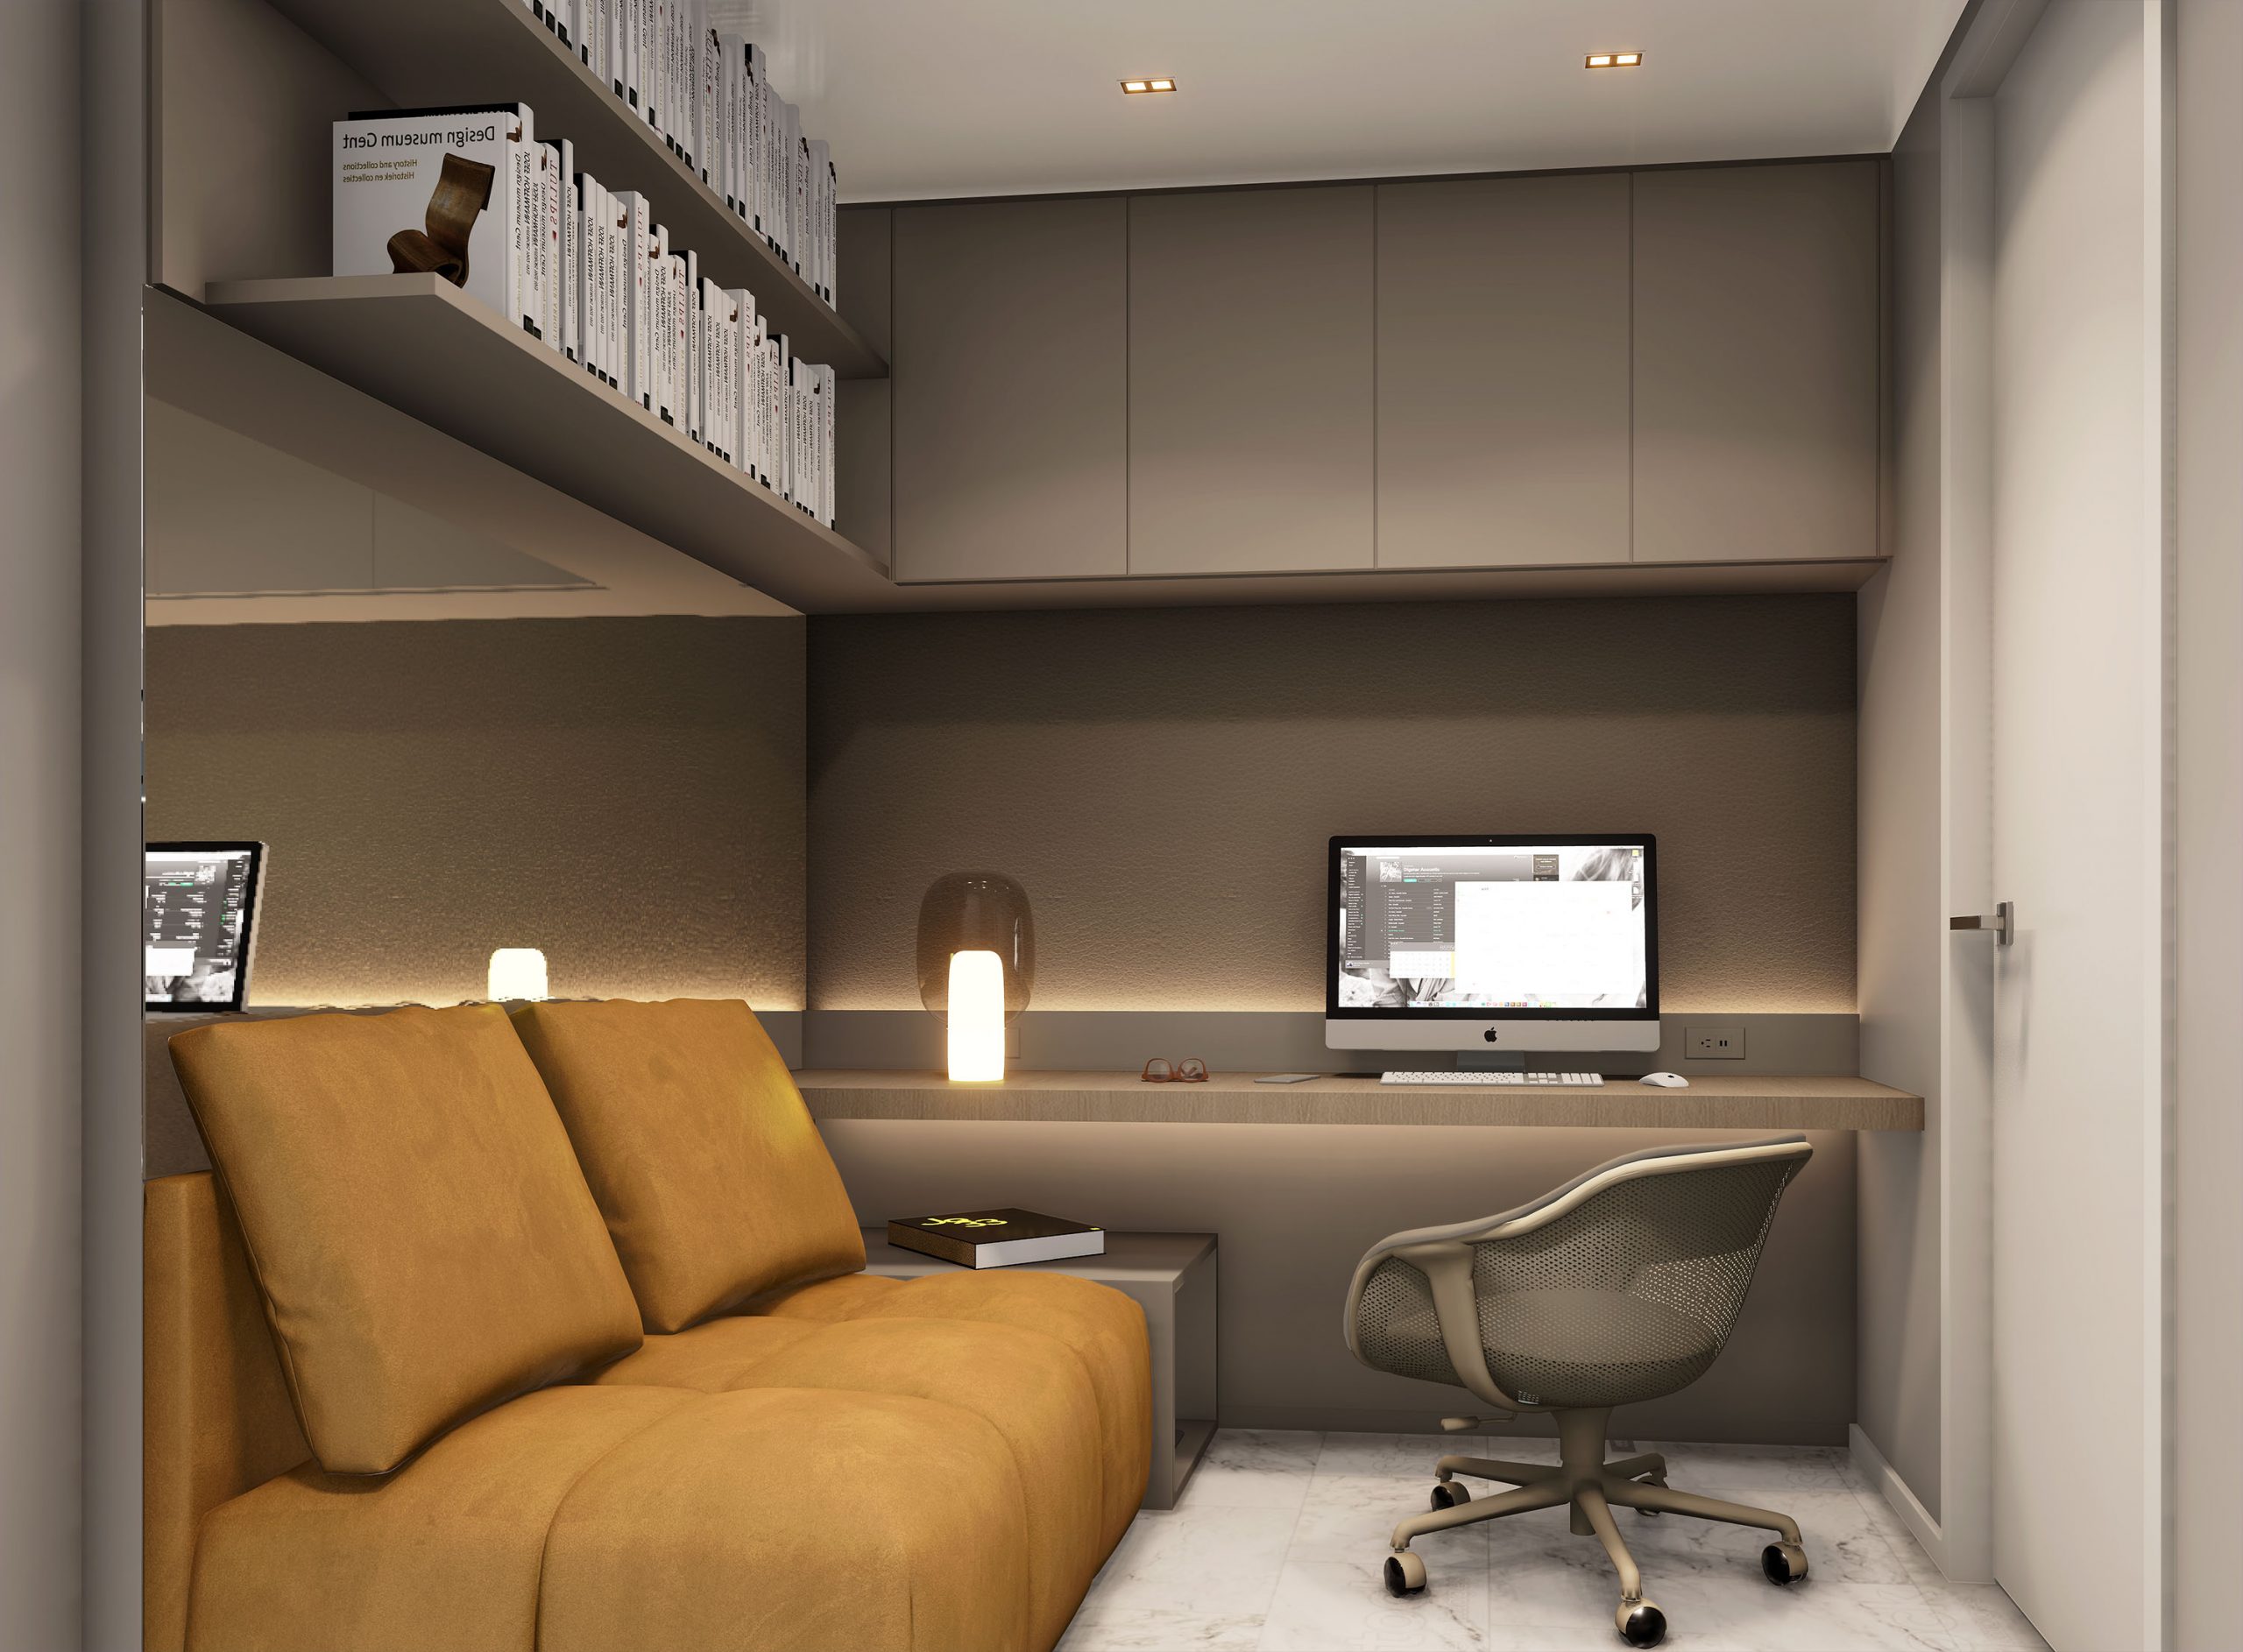 Compact home office in minimalist design, earthy colors, desk with built in LED lights, burnt-orange sofa and white marble floor